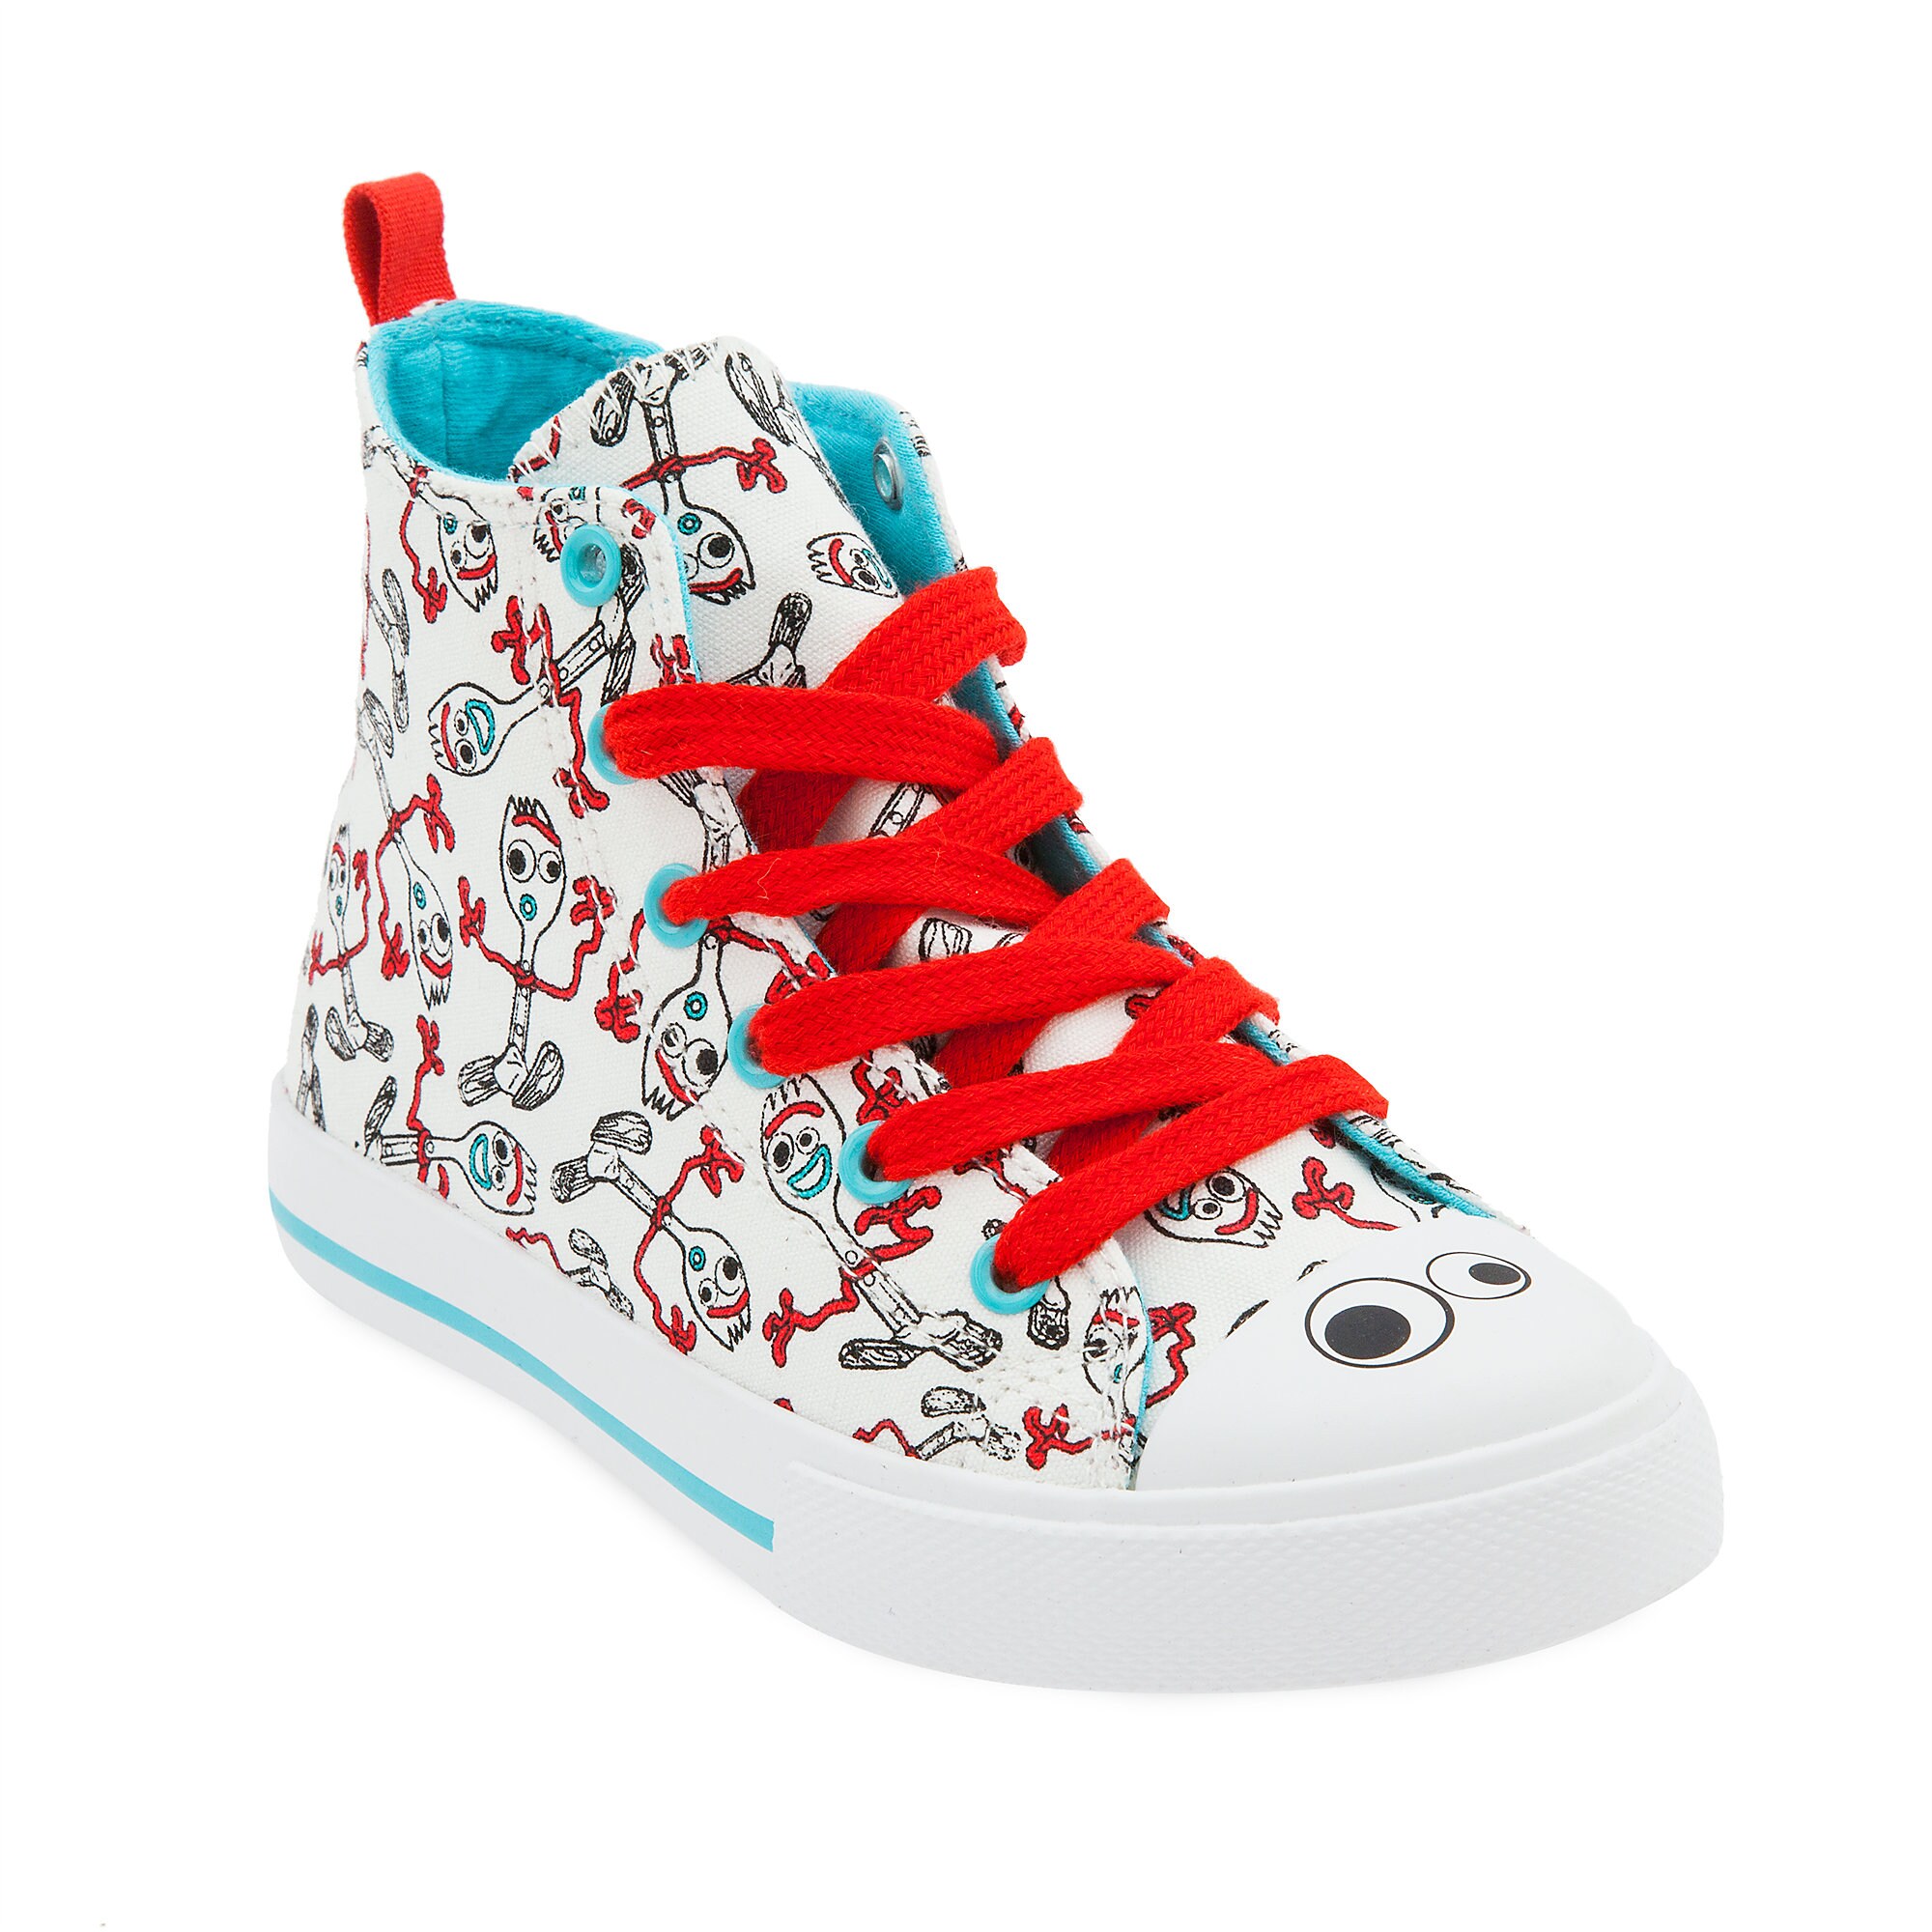 Forky Sneakers for Kids - Toy Story 4